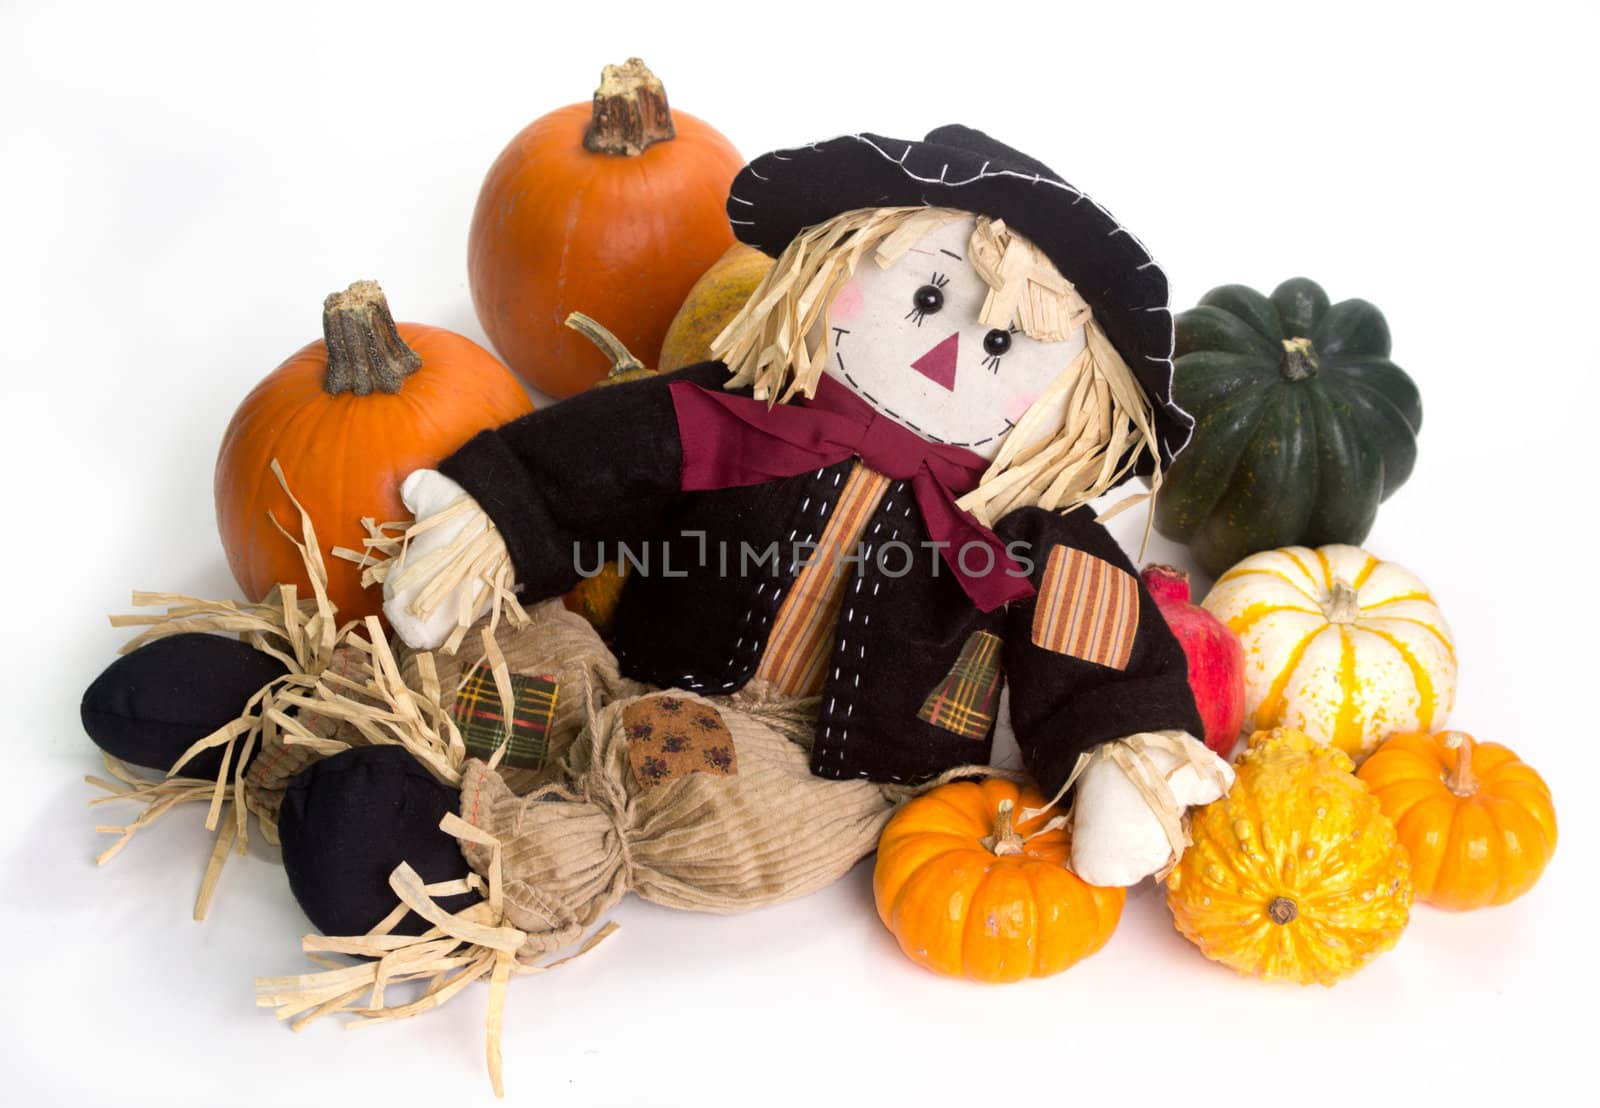 Harvest scarecrow laying on a bed squash, fairytale, cinderella, and Halloween pumpkins.